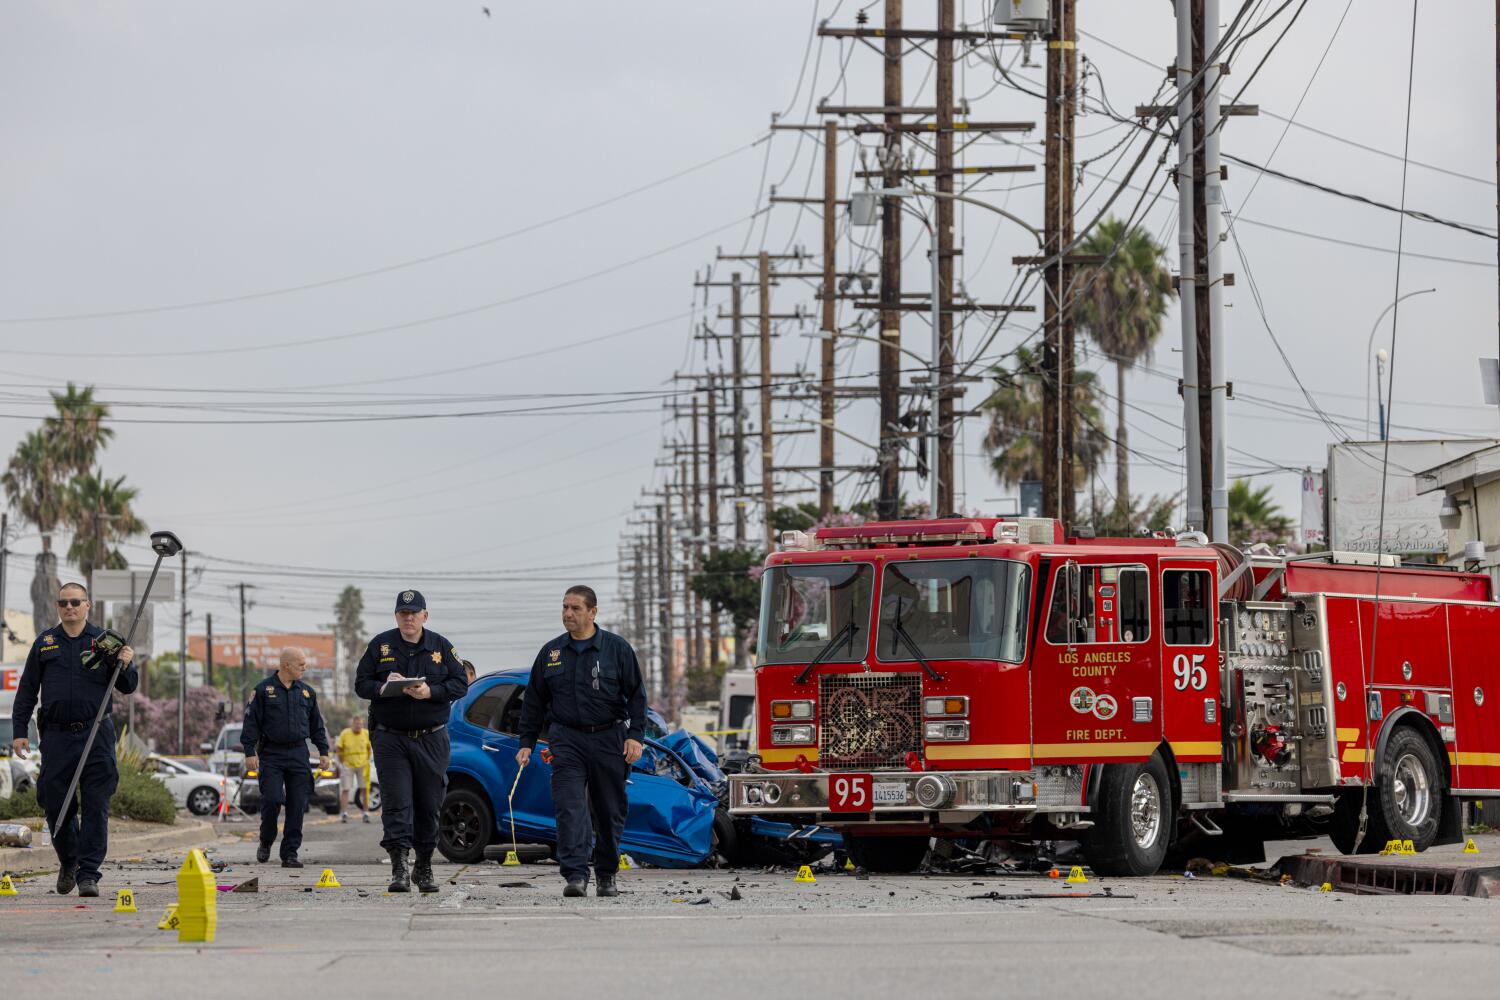 Authorities identify driver killed in high-speed crash with firetruck in West Compton